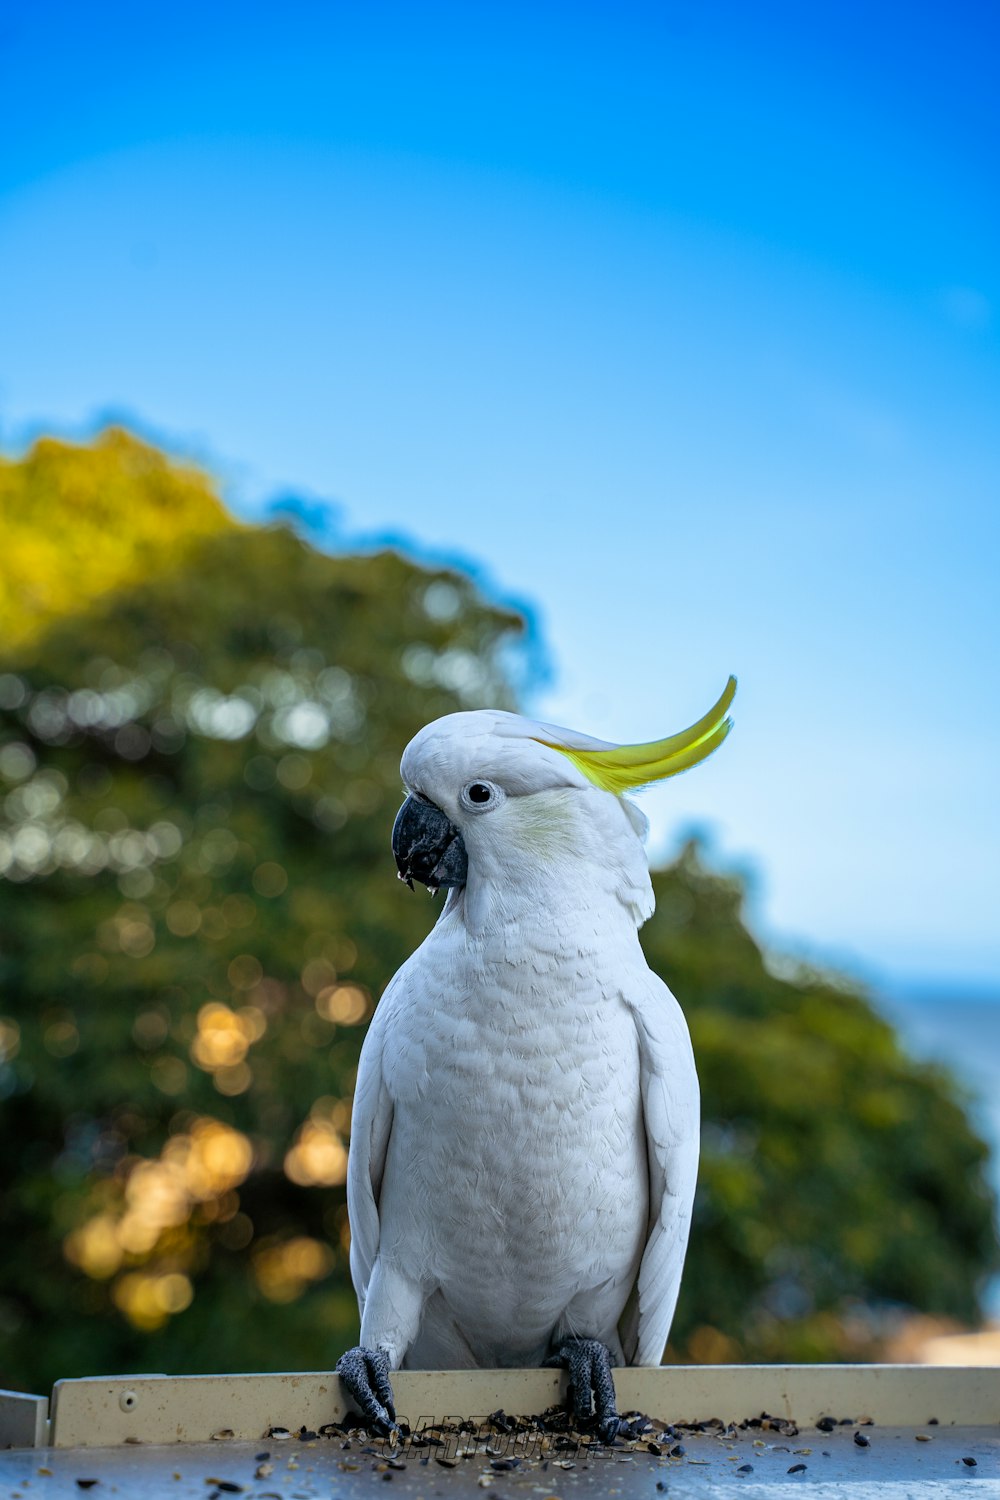 a white cockatoo with a yellow beak sitting on a ledge